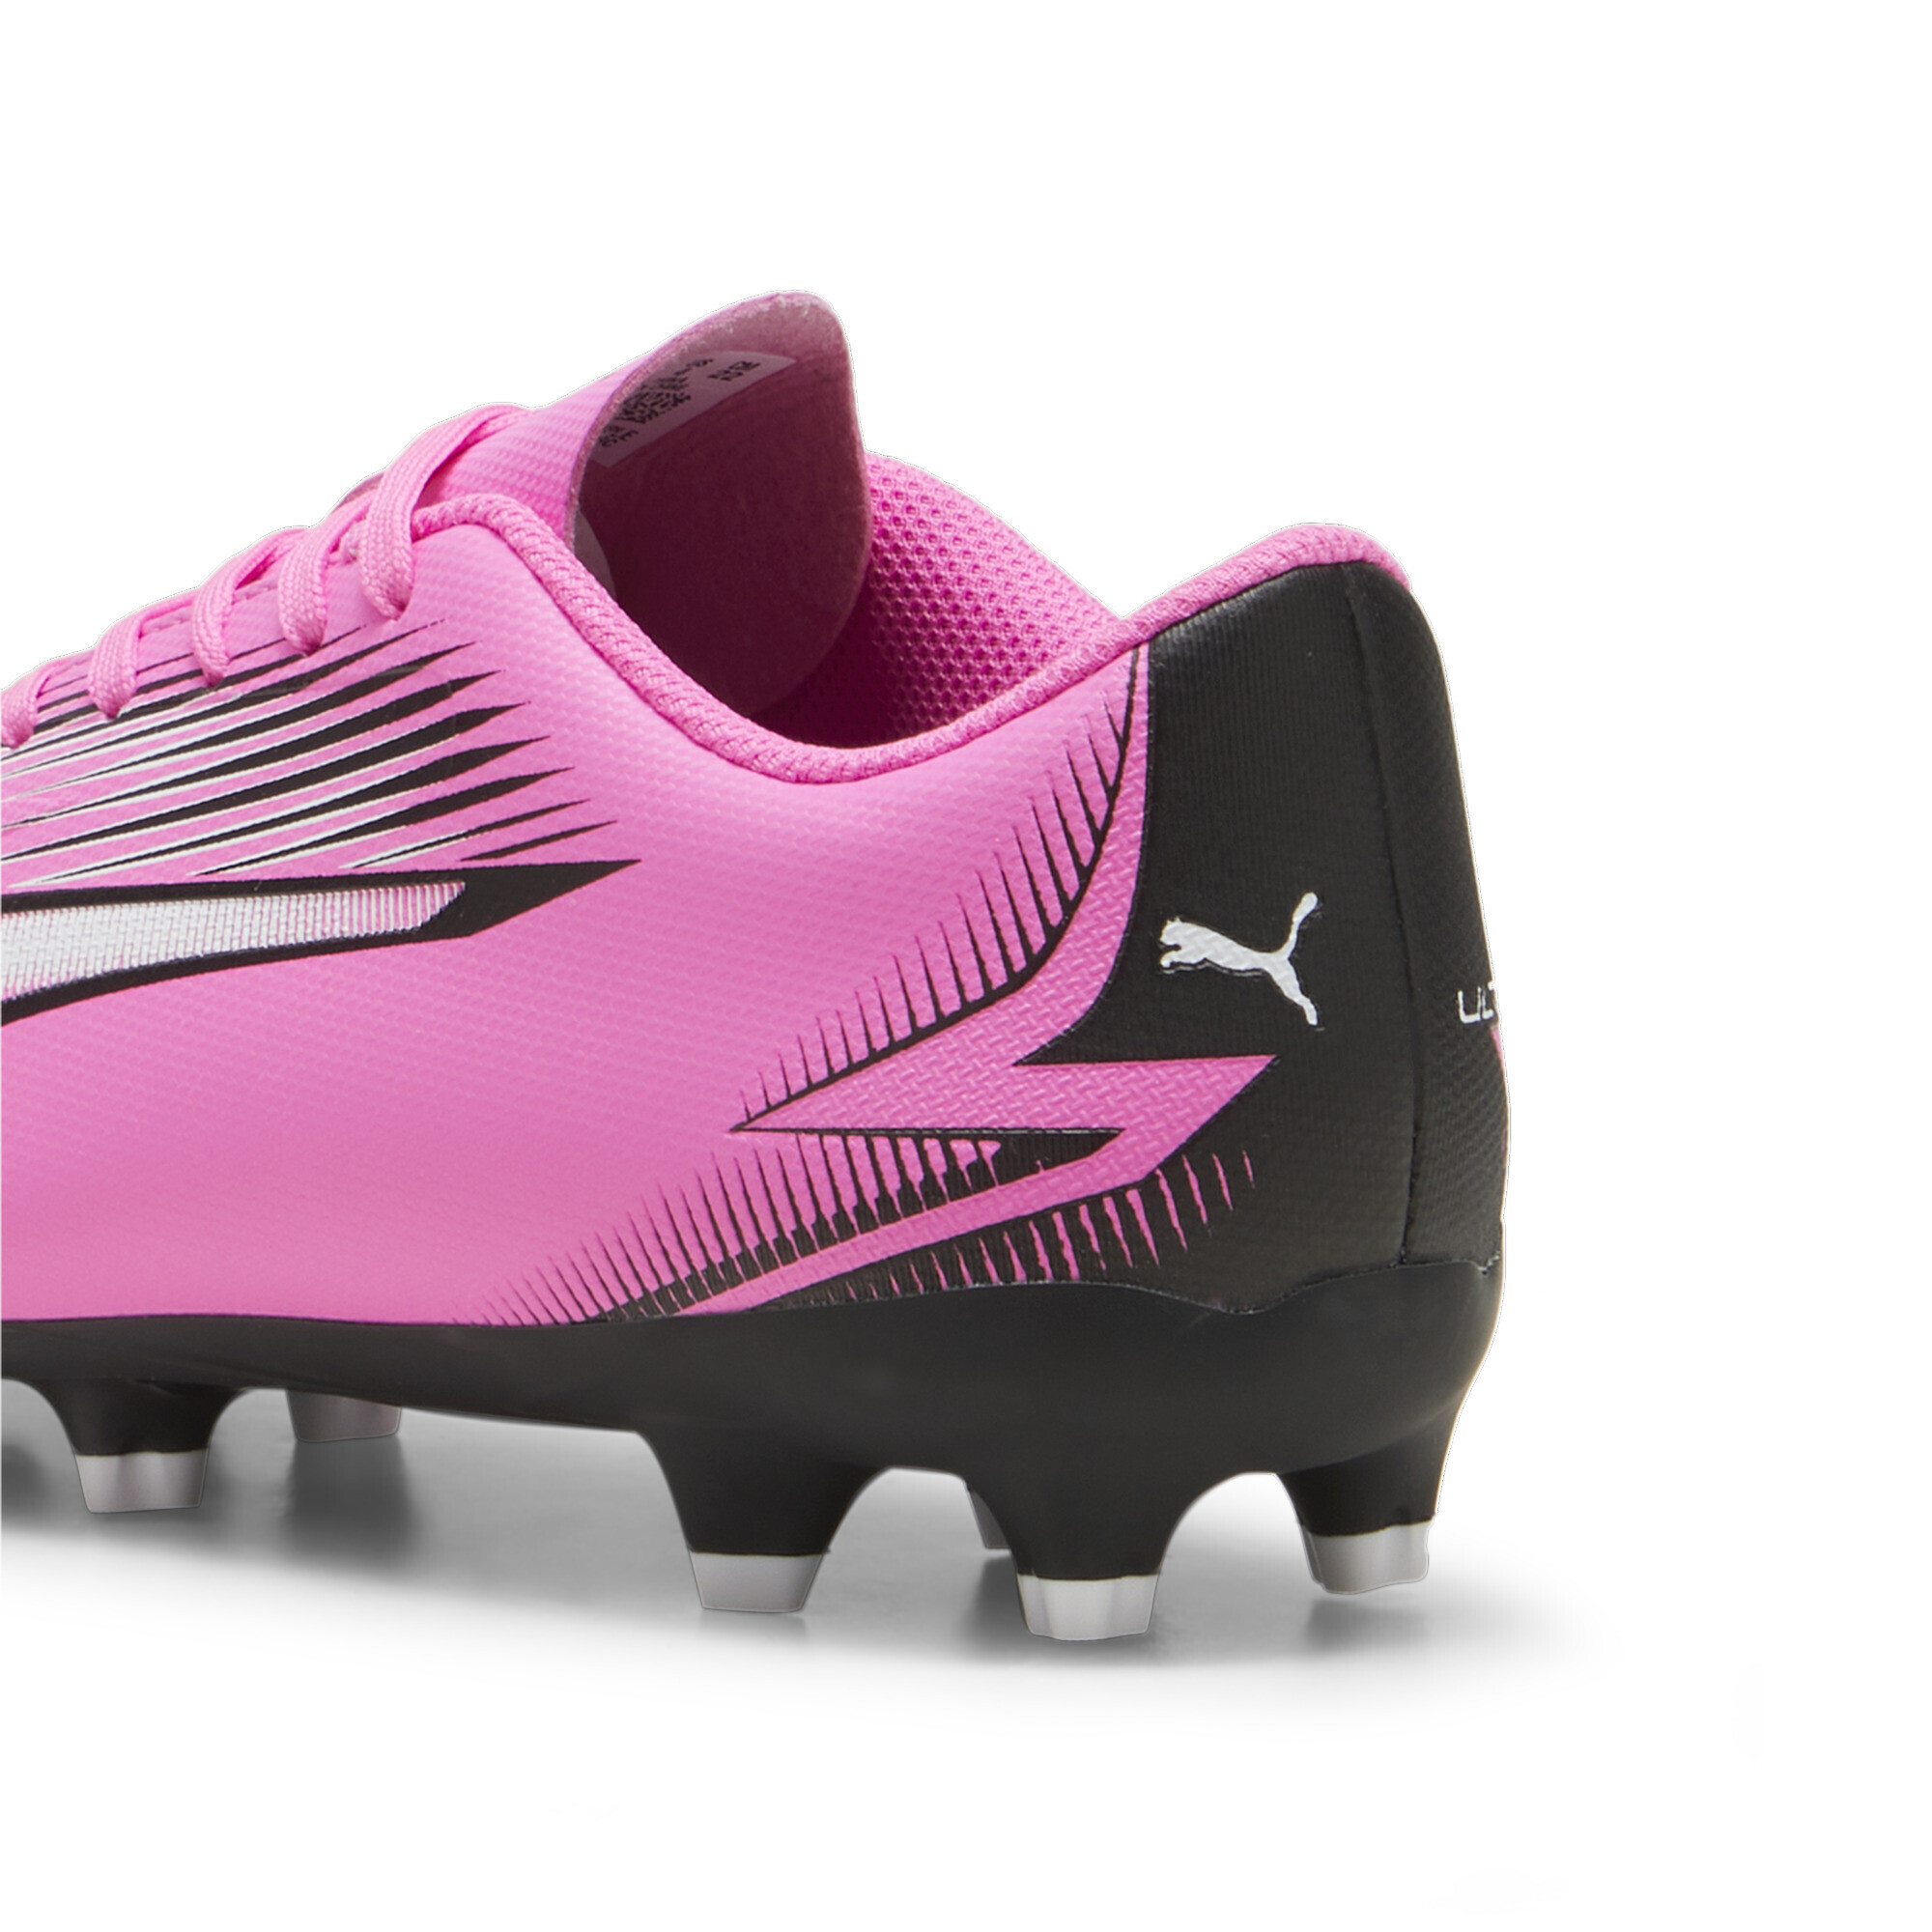 PUMA ULTRA PLAY FG/AG Youth Football Boots In Pink, Size EU 32